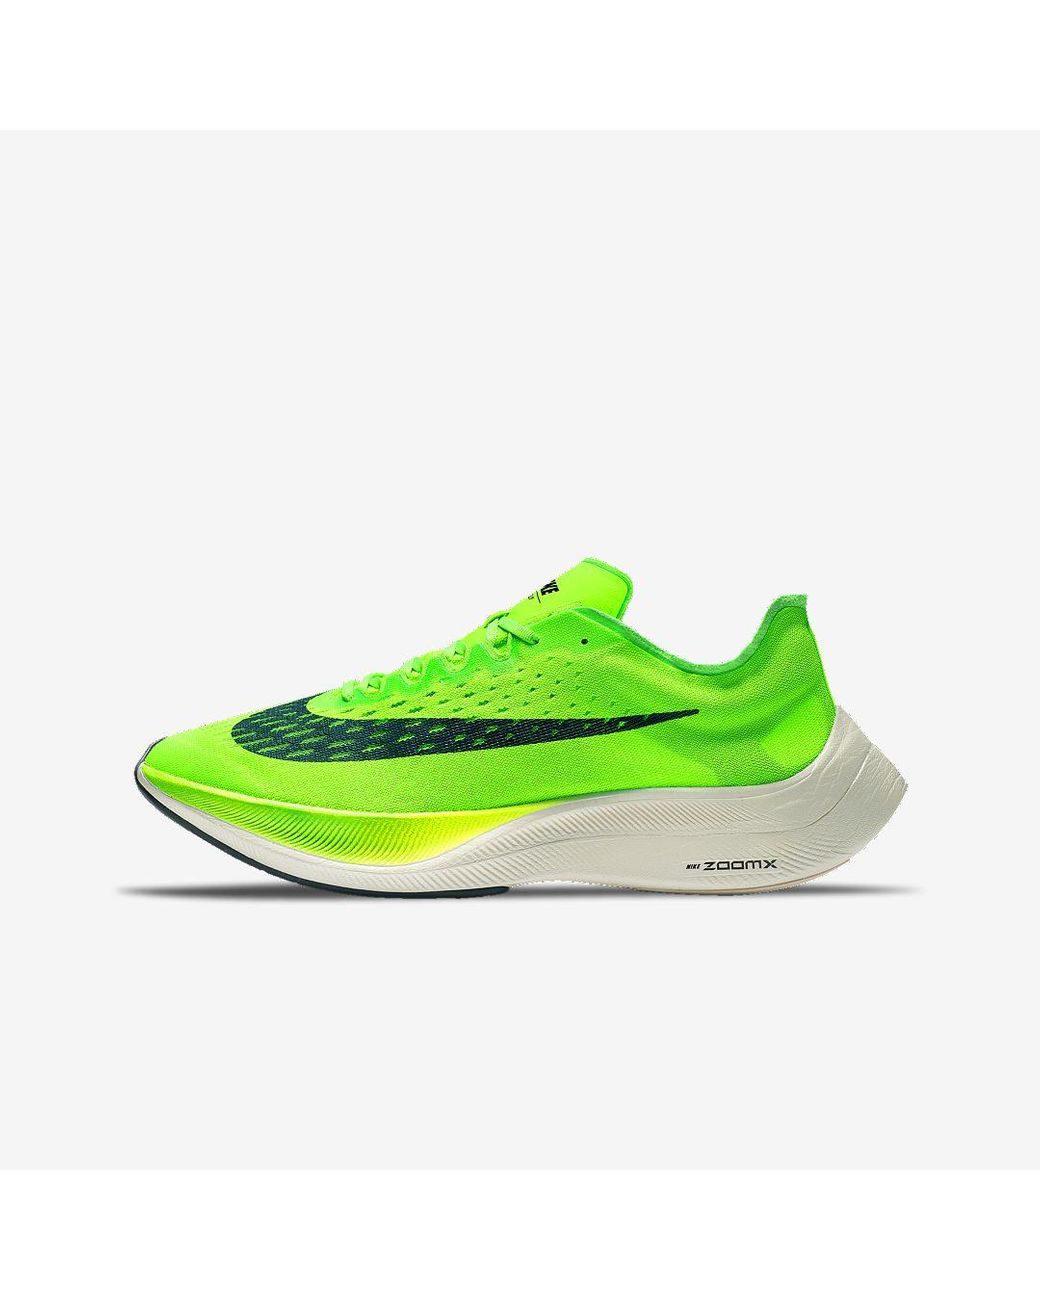 Nike Zoomx Vaporfly Next% By You Custom Running Shoe in Green | Lyst